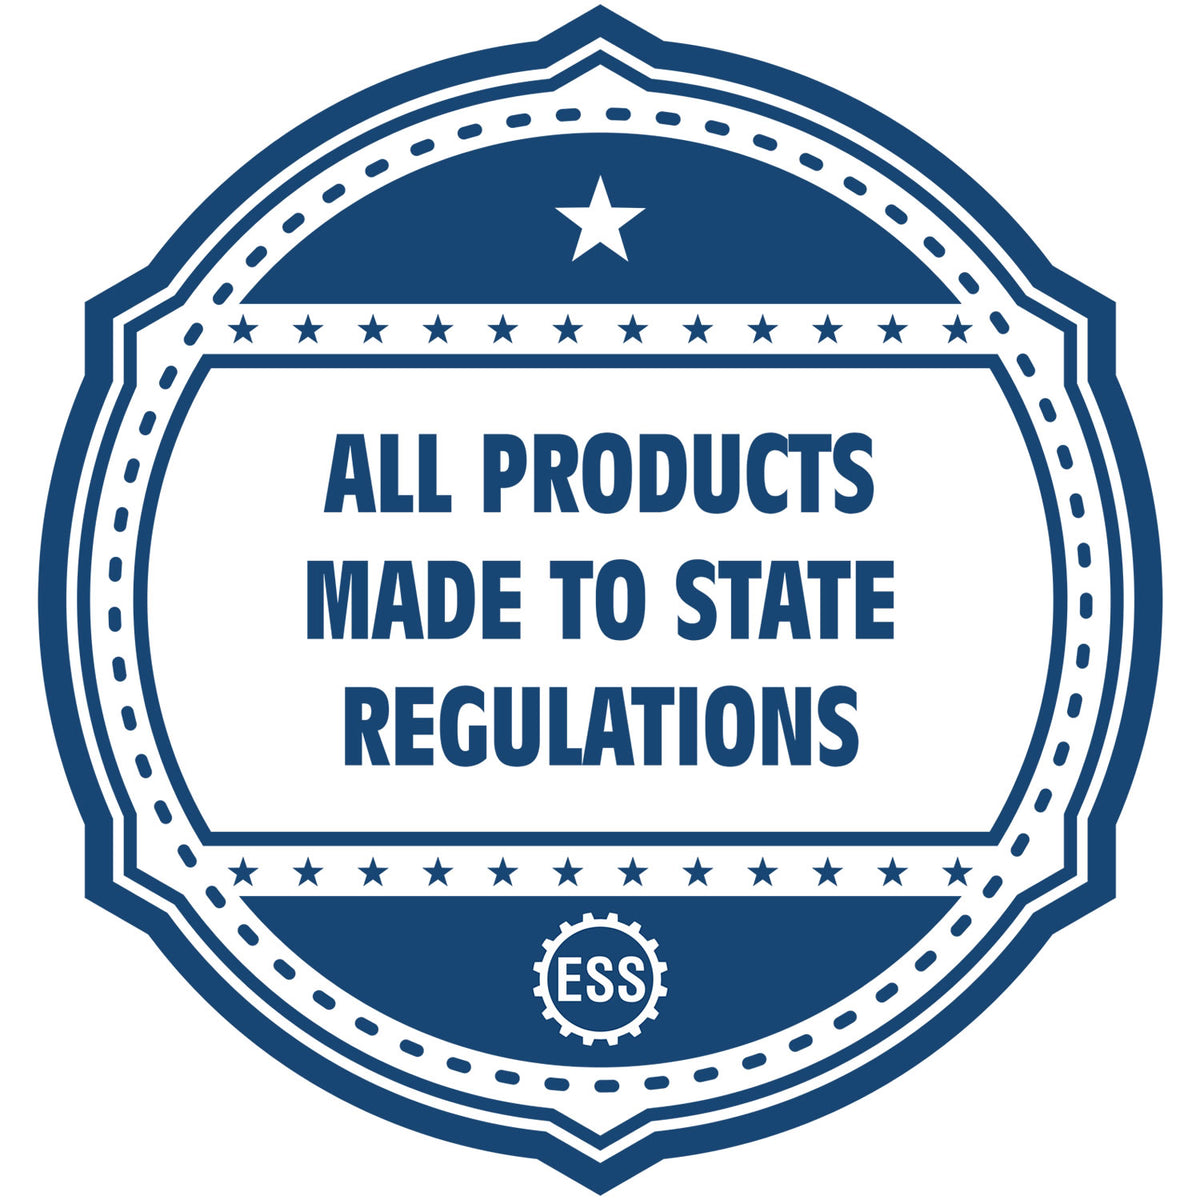 An icon or badge element for the Michigan Desk Surveyor Seal Embosser showing that this product is made in compliance with state regulations.